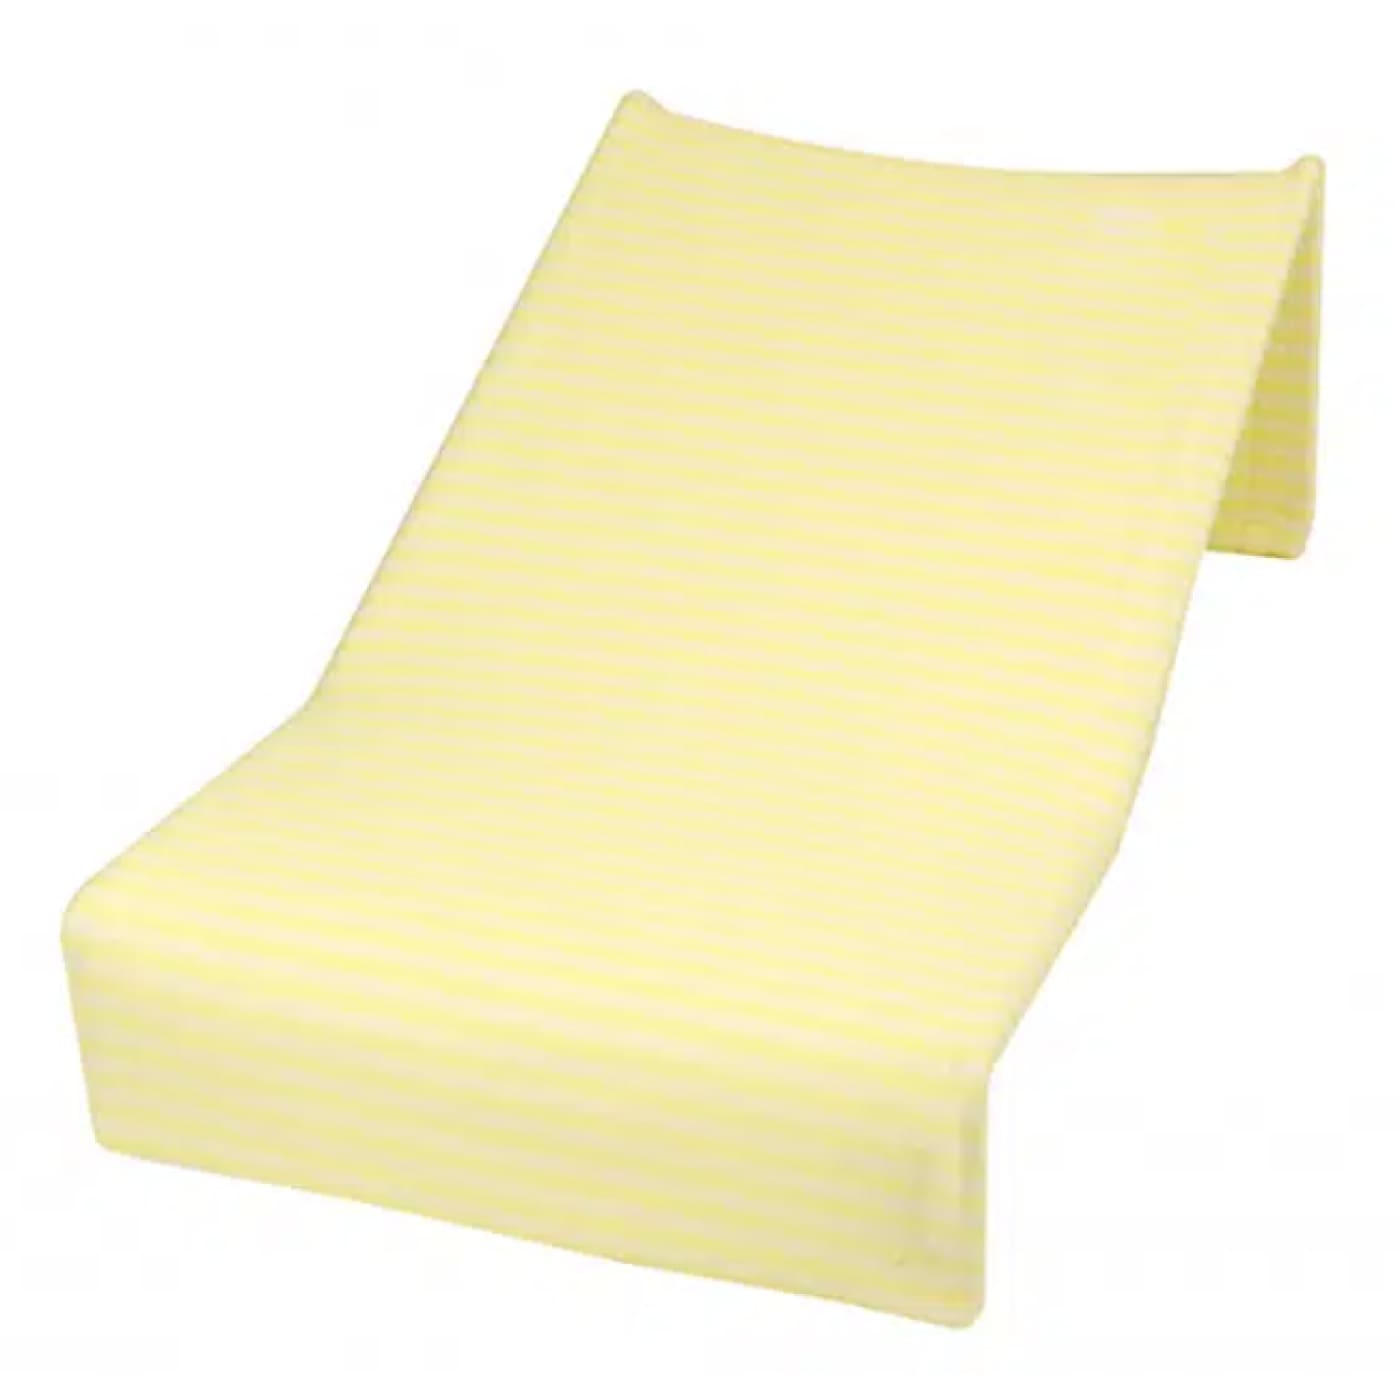 Babyhood Bath Support Towelling - Yellow/White Stripes - Yellow/White Stripes - BATHTIME & CHANGING - BATH SUPPORTS/SEATS